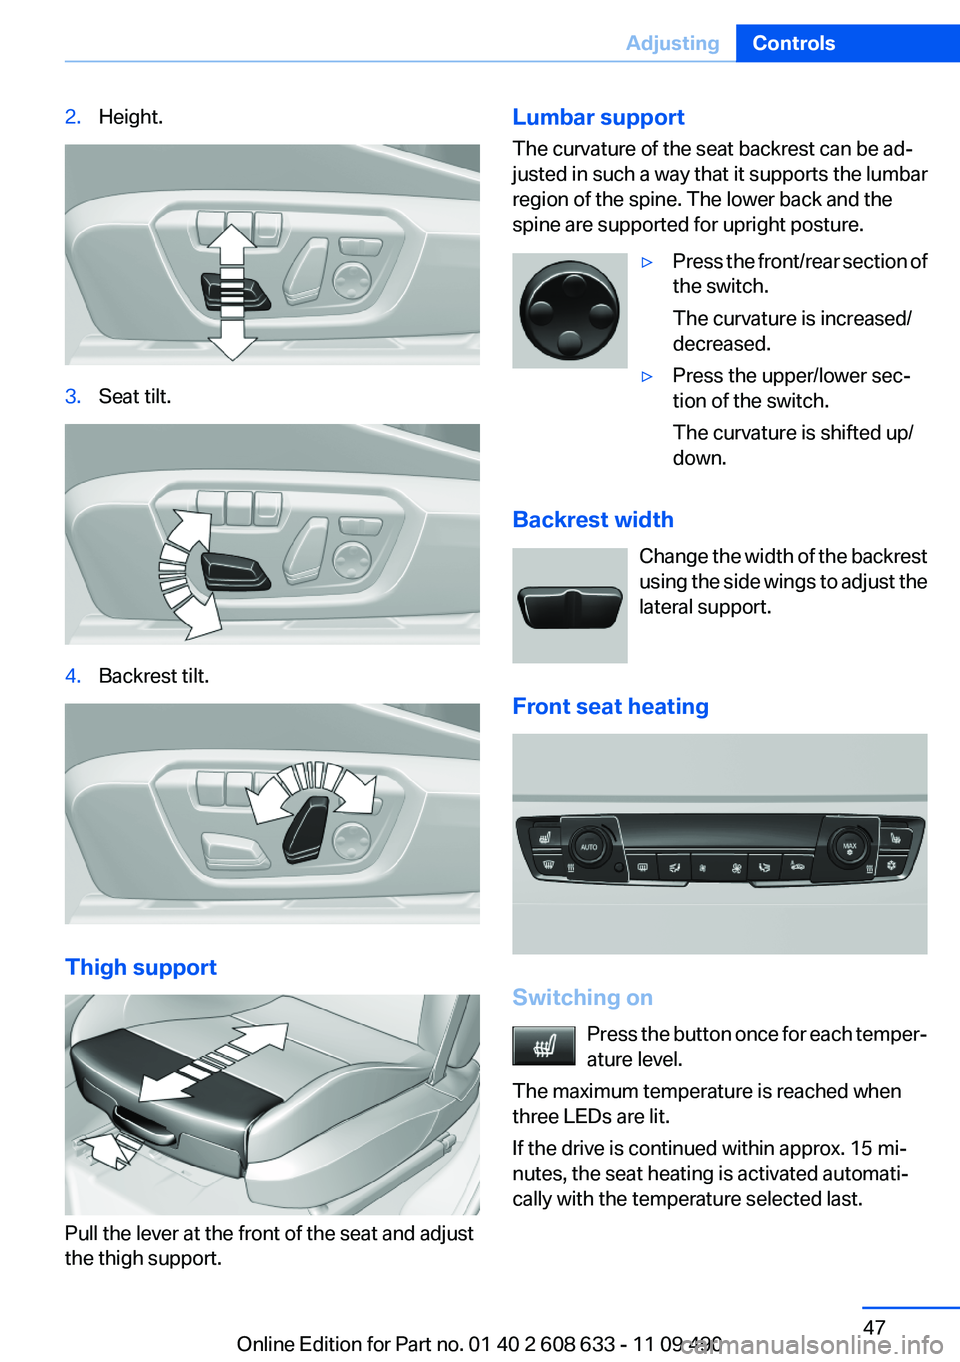 BMW 335I 2012  Owners Manual 2.Height.3.Seat tilt.4.Backrest tilt.
Thigh support
Pull the lever at the front of the seat and adjust
the thigh support.
Lumbar support
The curvature of the seat backrest can be ad‐
justed in such 